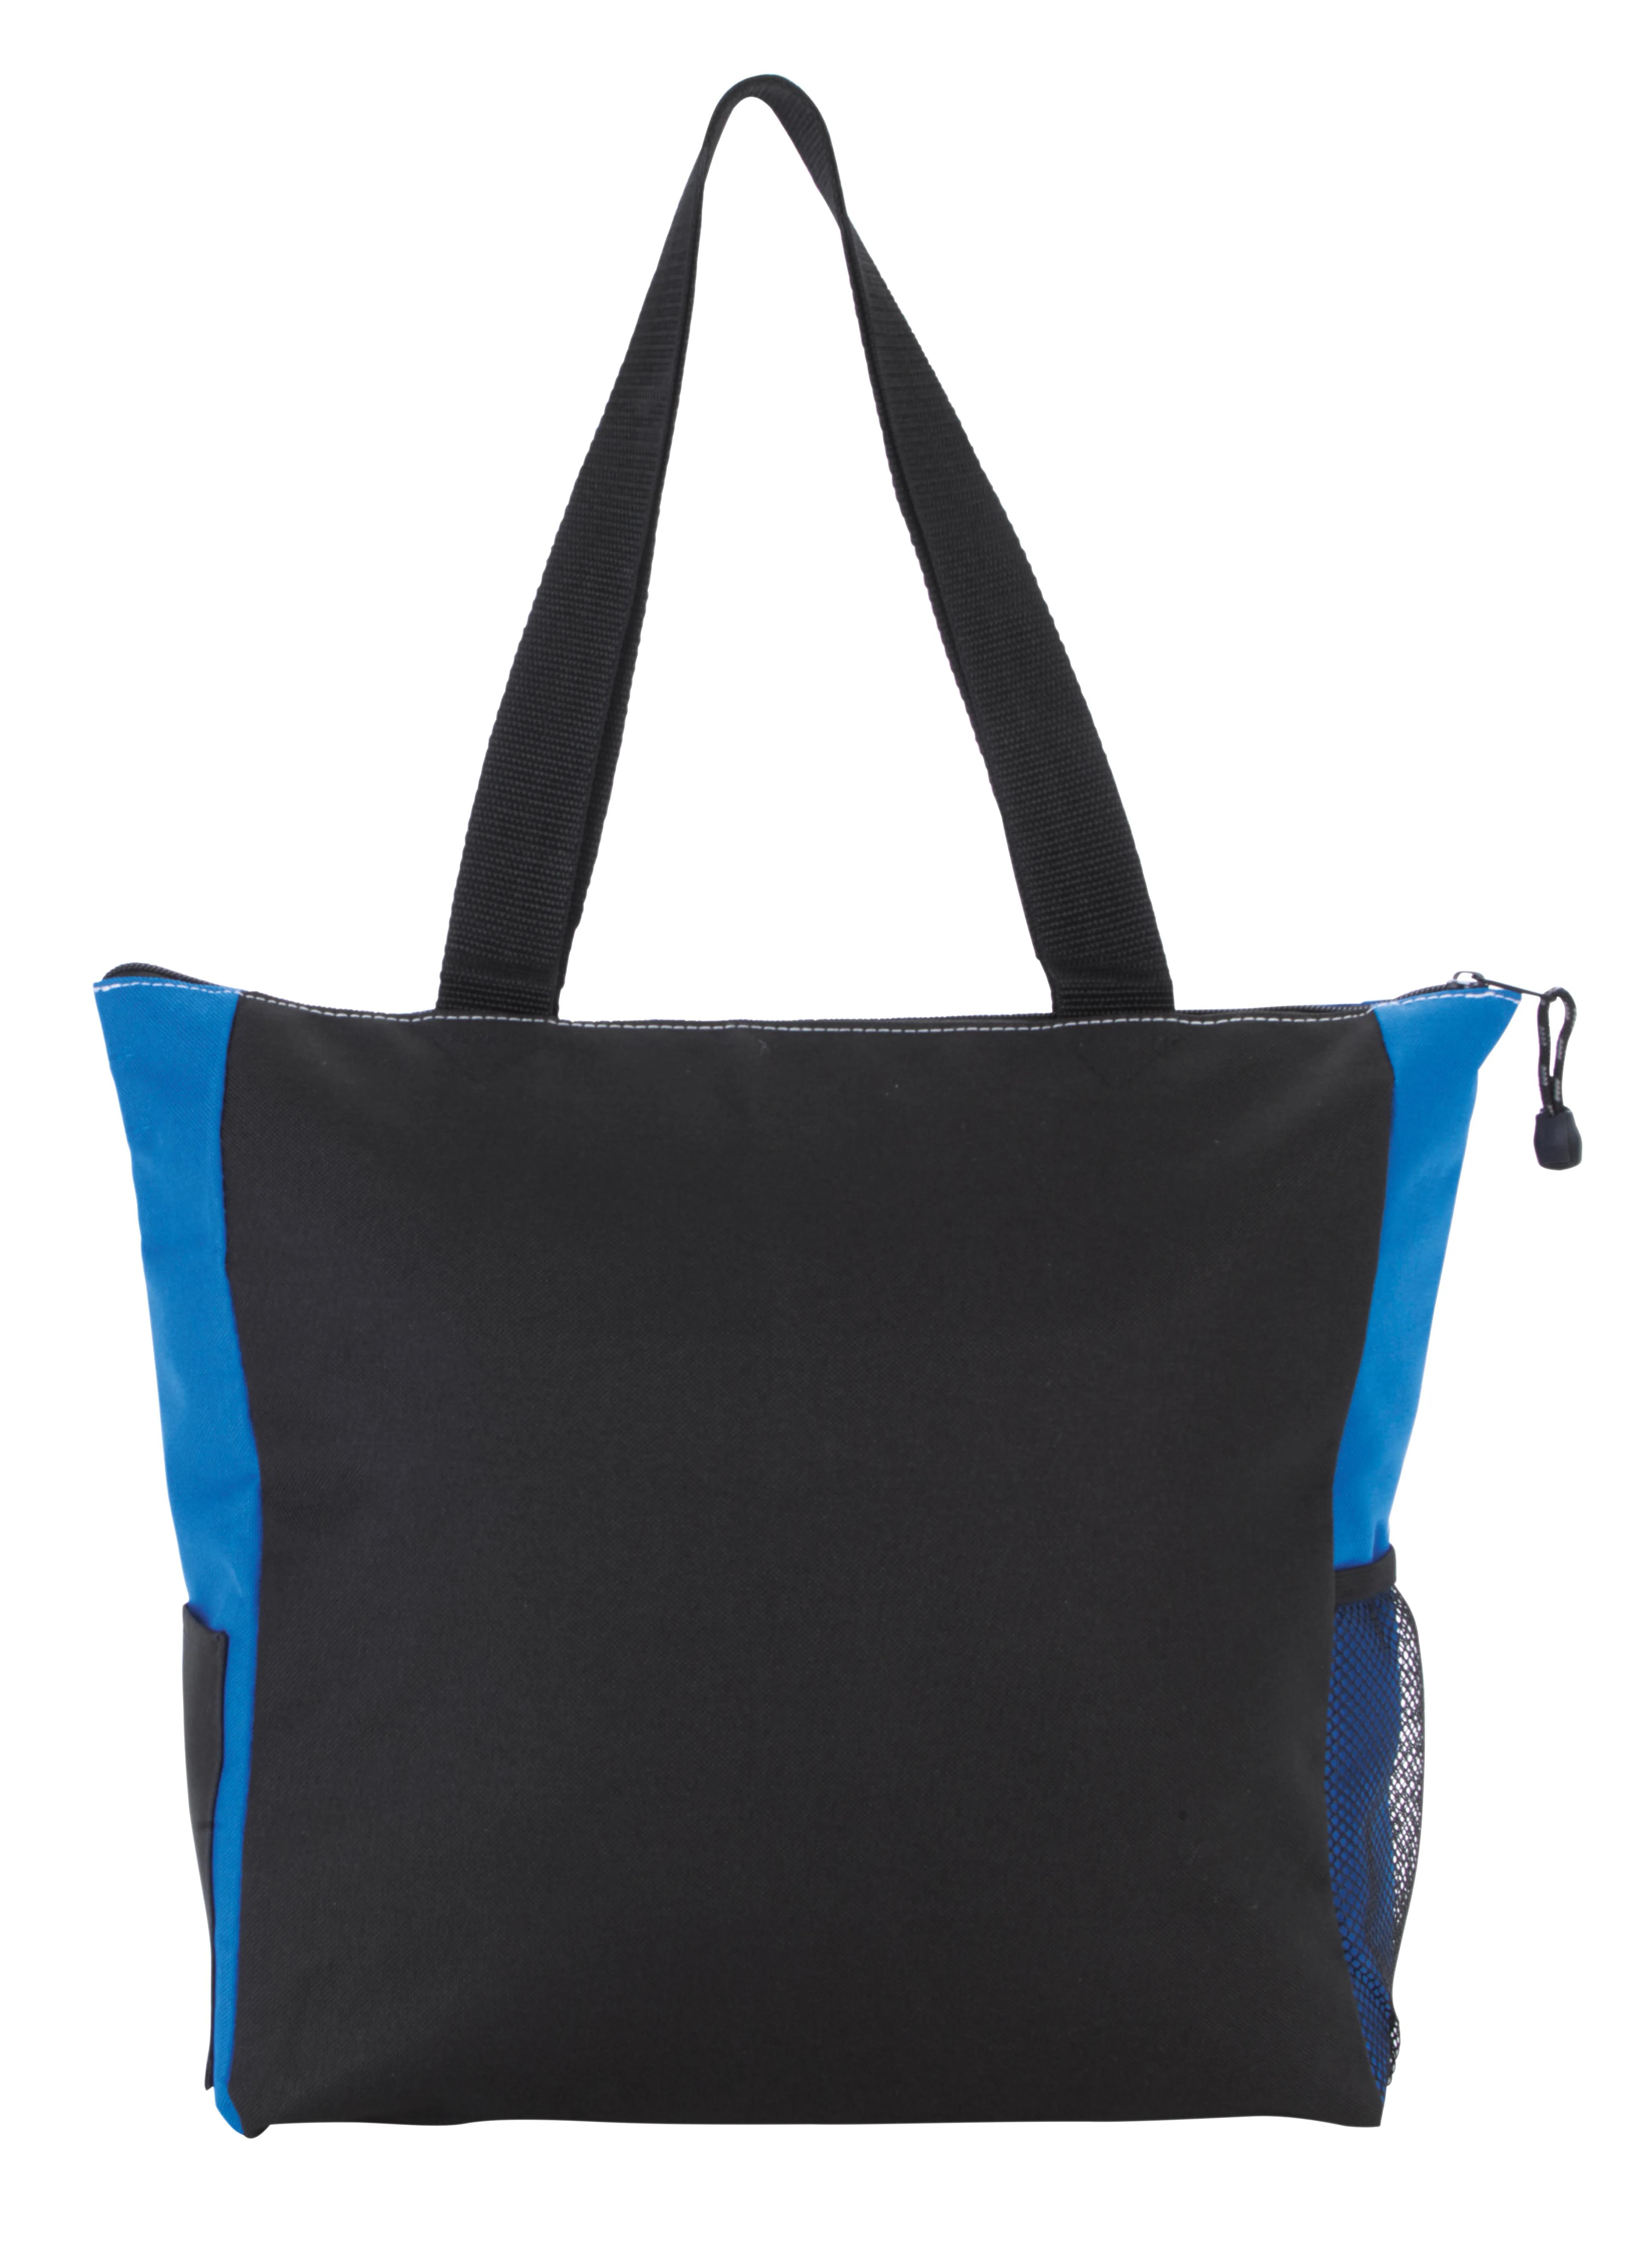 Two-Tone TranSport It Tote 7 of 29